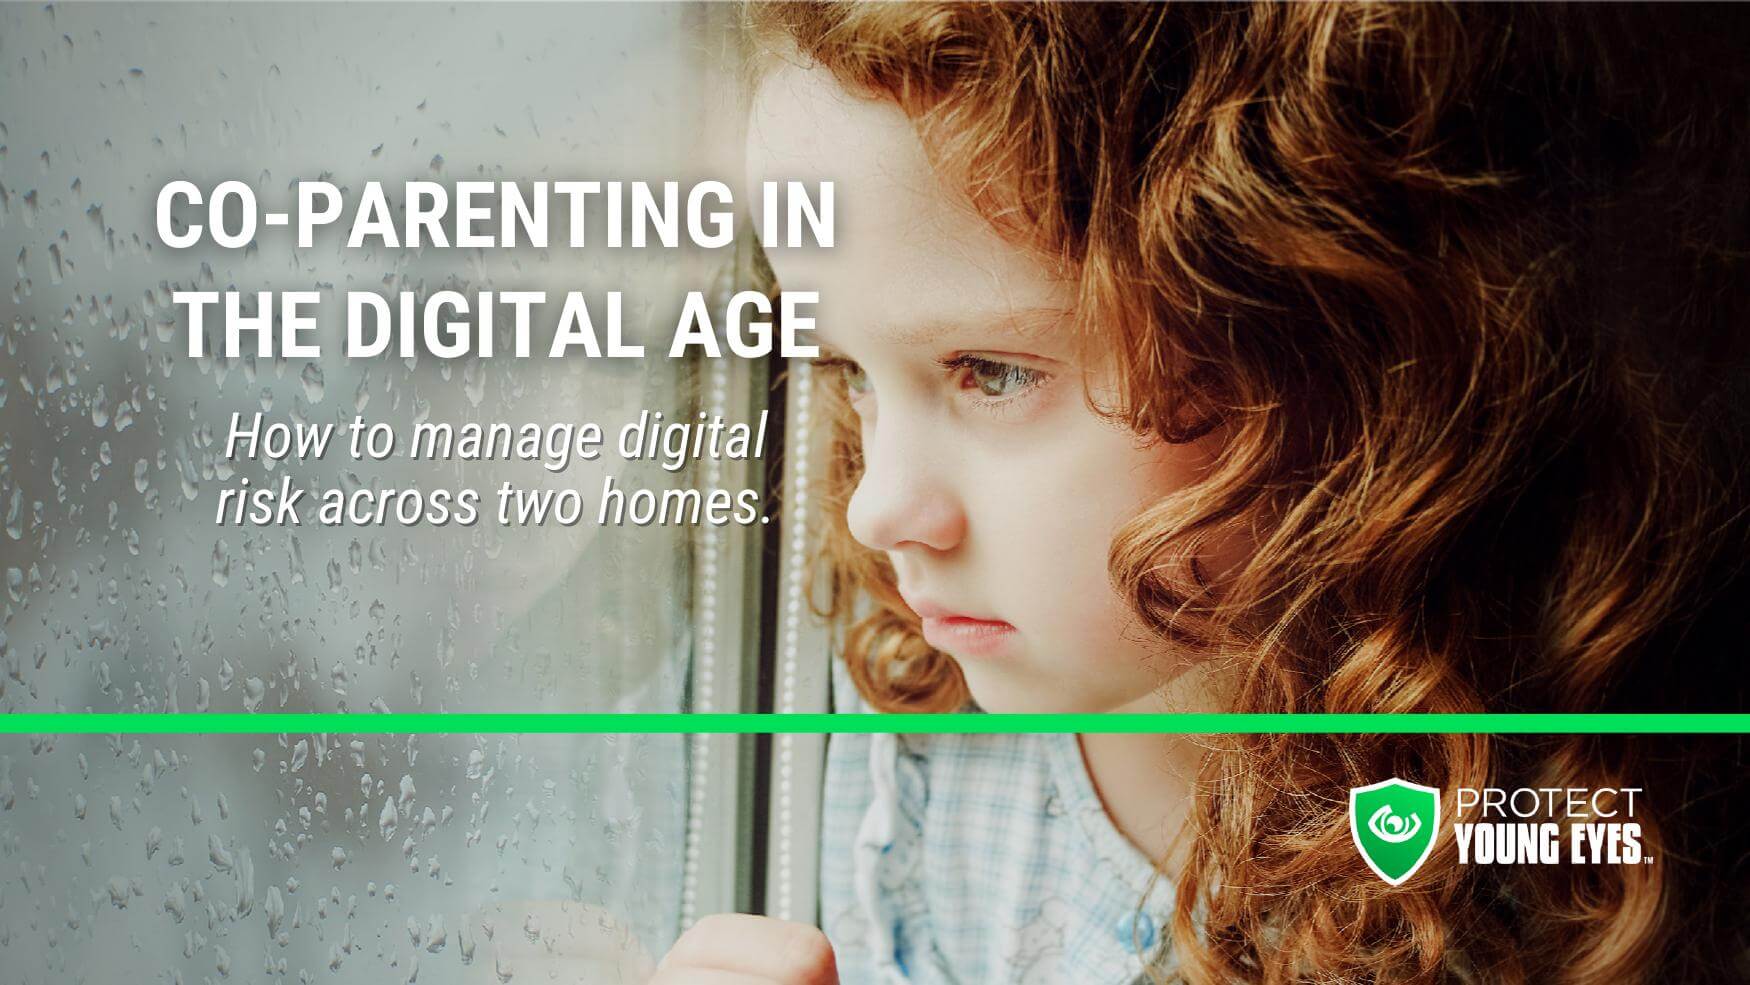 Boy Boy Xxx Video Pashto - A Guide to Co-Parenting in the Digital Age - Protect Young Eyes